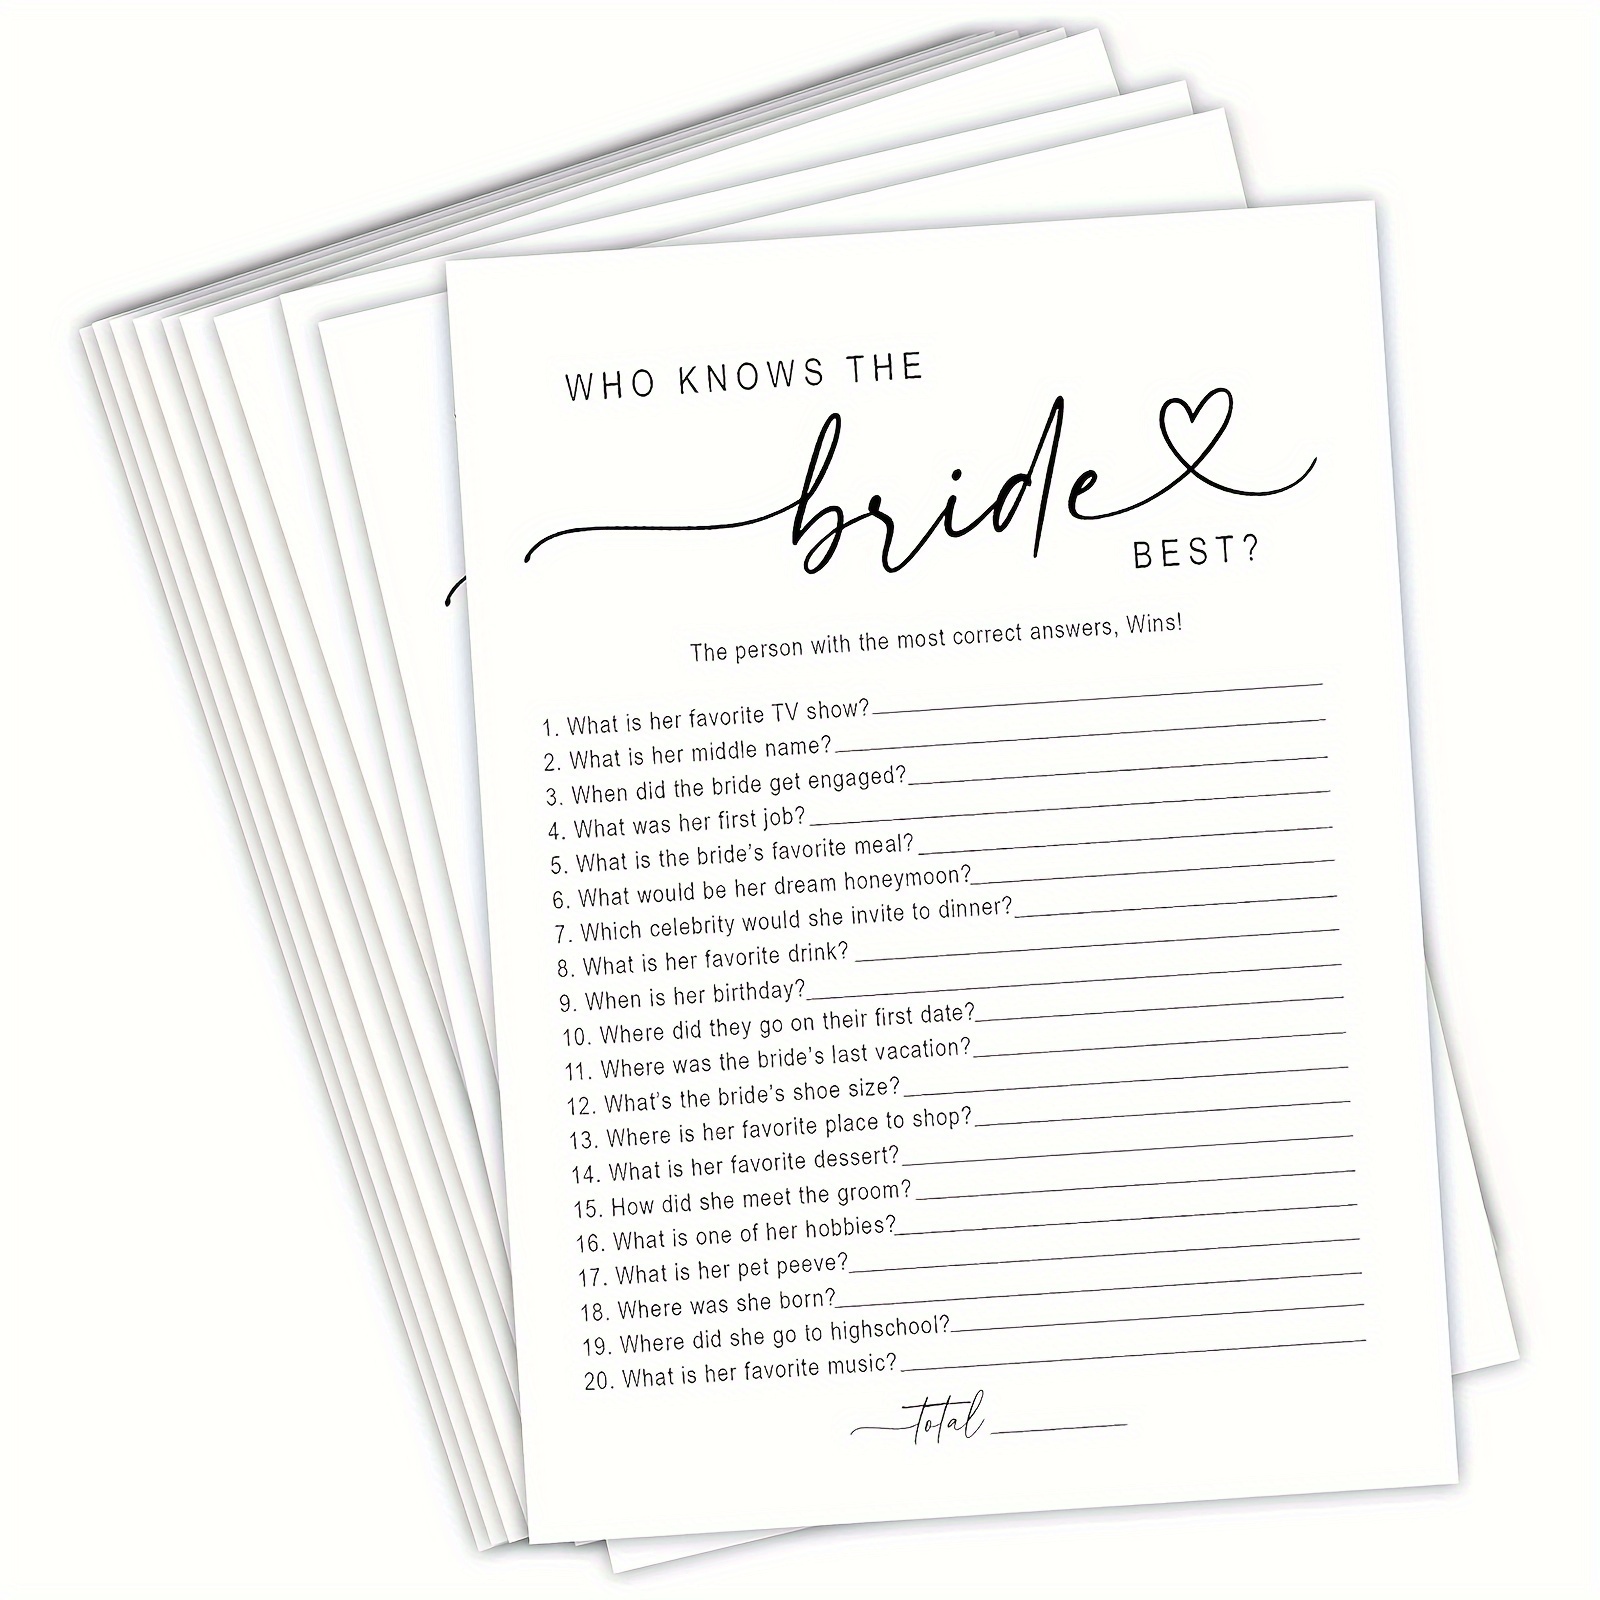 

20pcs Bridal Shower Games Who Knows The Bride Best Cards, Fun Activities For Weddings, Bridal Showers And Bachelorette Parties